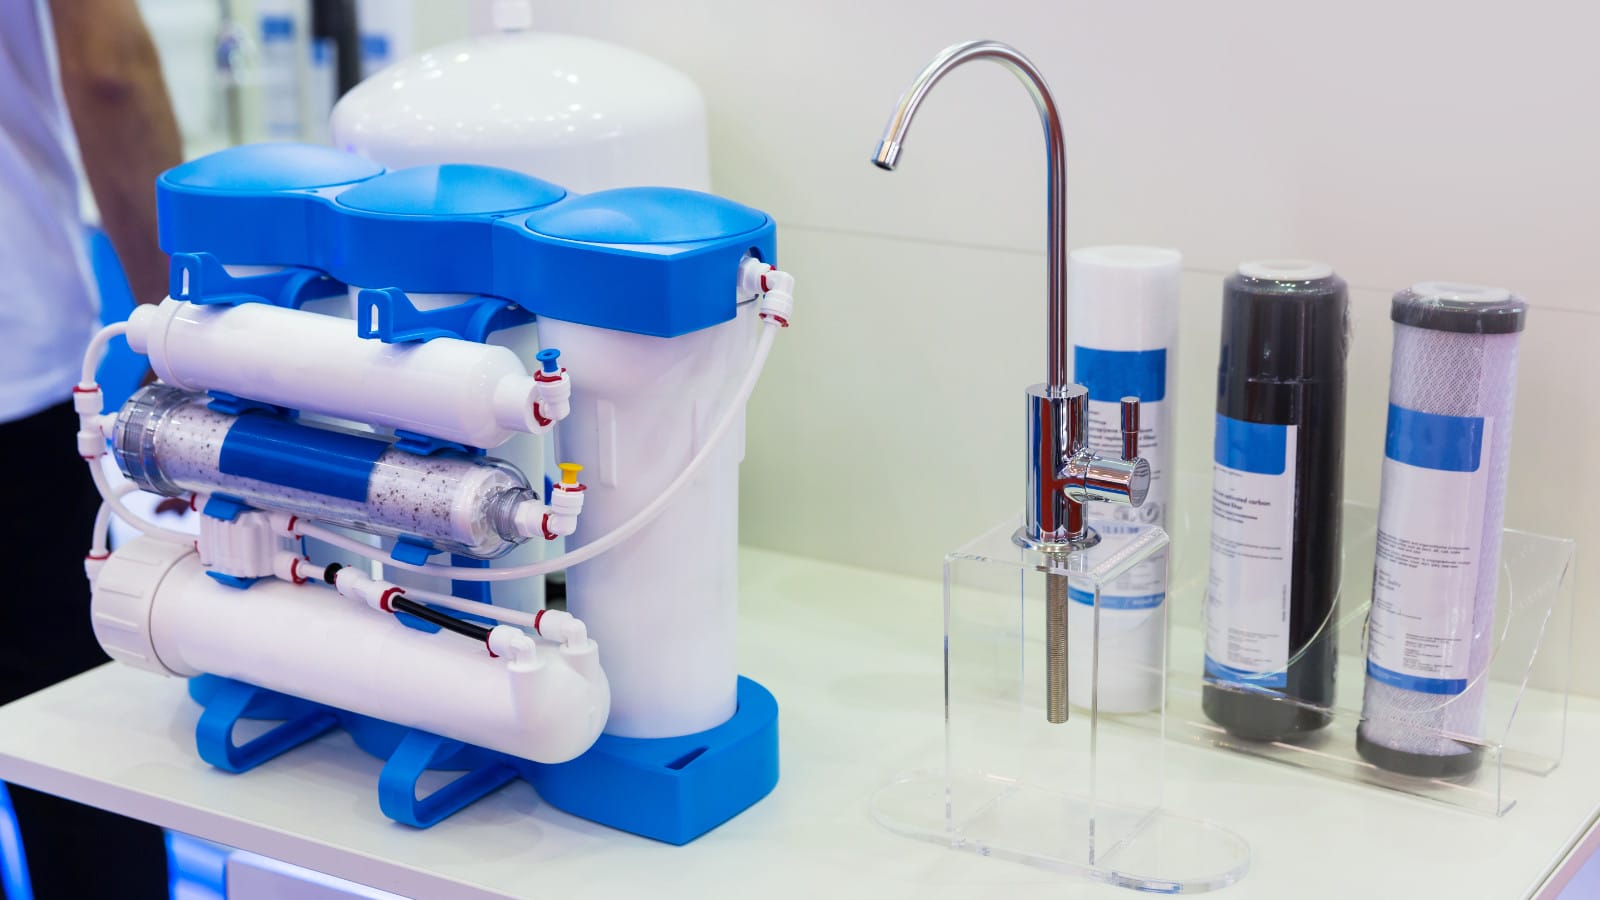 A modern home water filtration system on display with various filter stages, including sediment and charcoal filters, connected by pipes to a chrome faucet, demonstrating residential water purification technology.